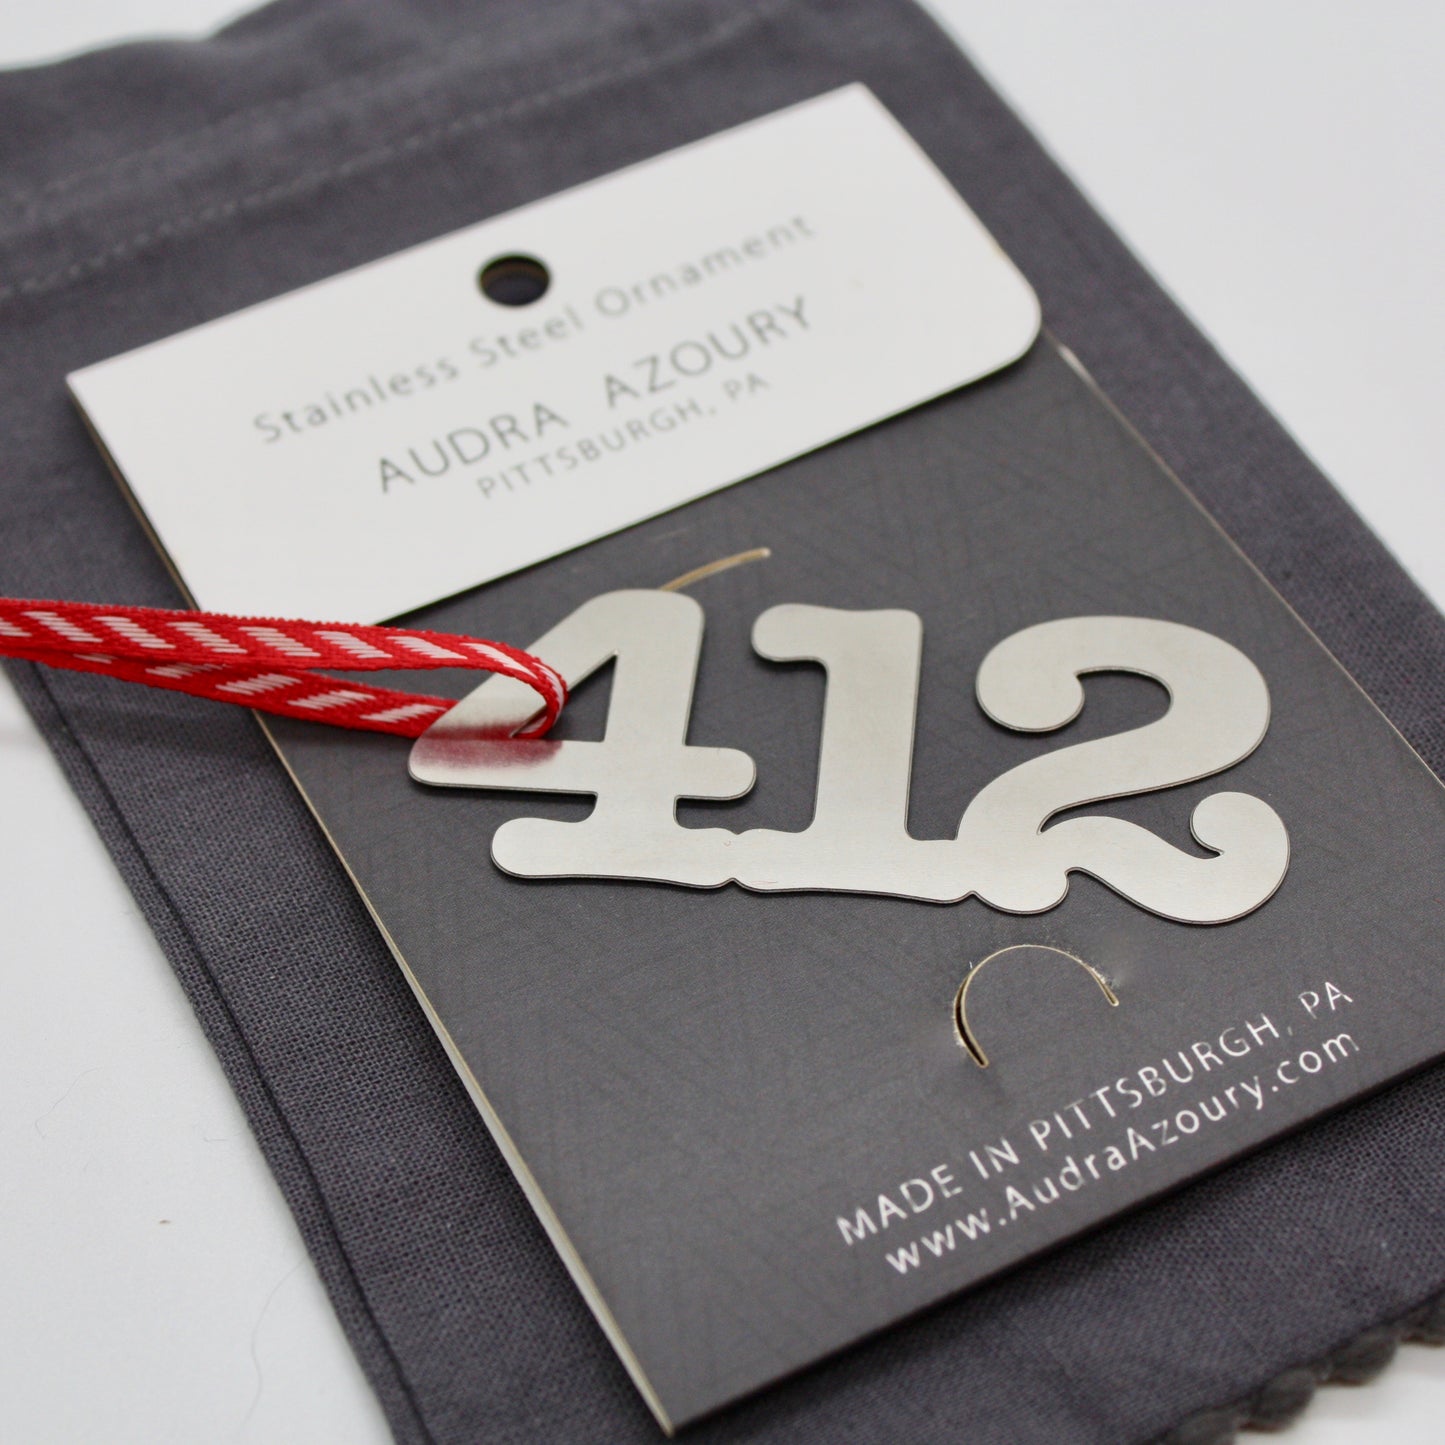 412 Pittsburgh Area Code Stainless Steel Ornament by Audra Azoury